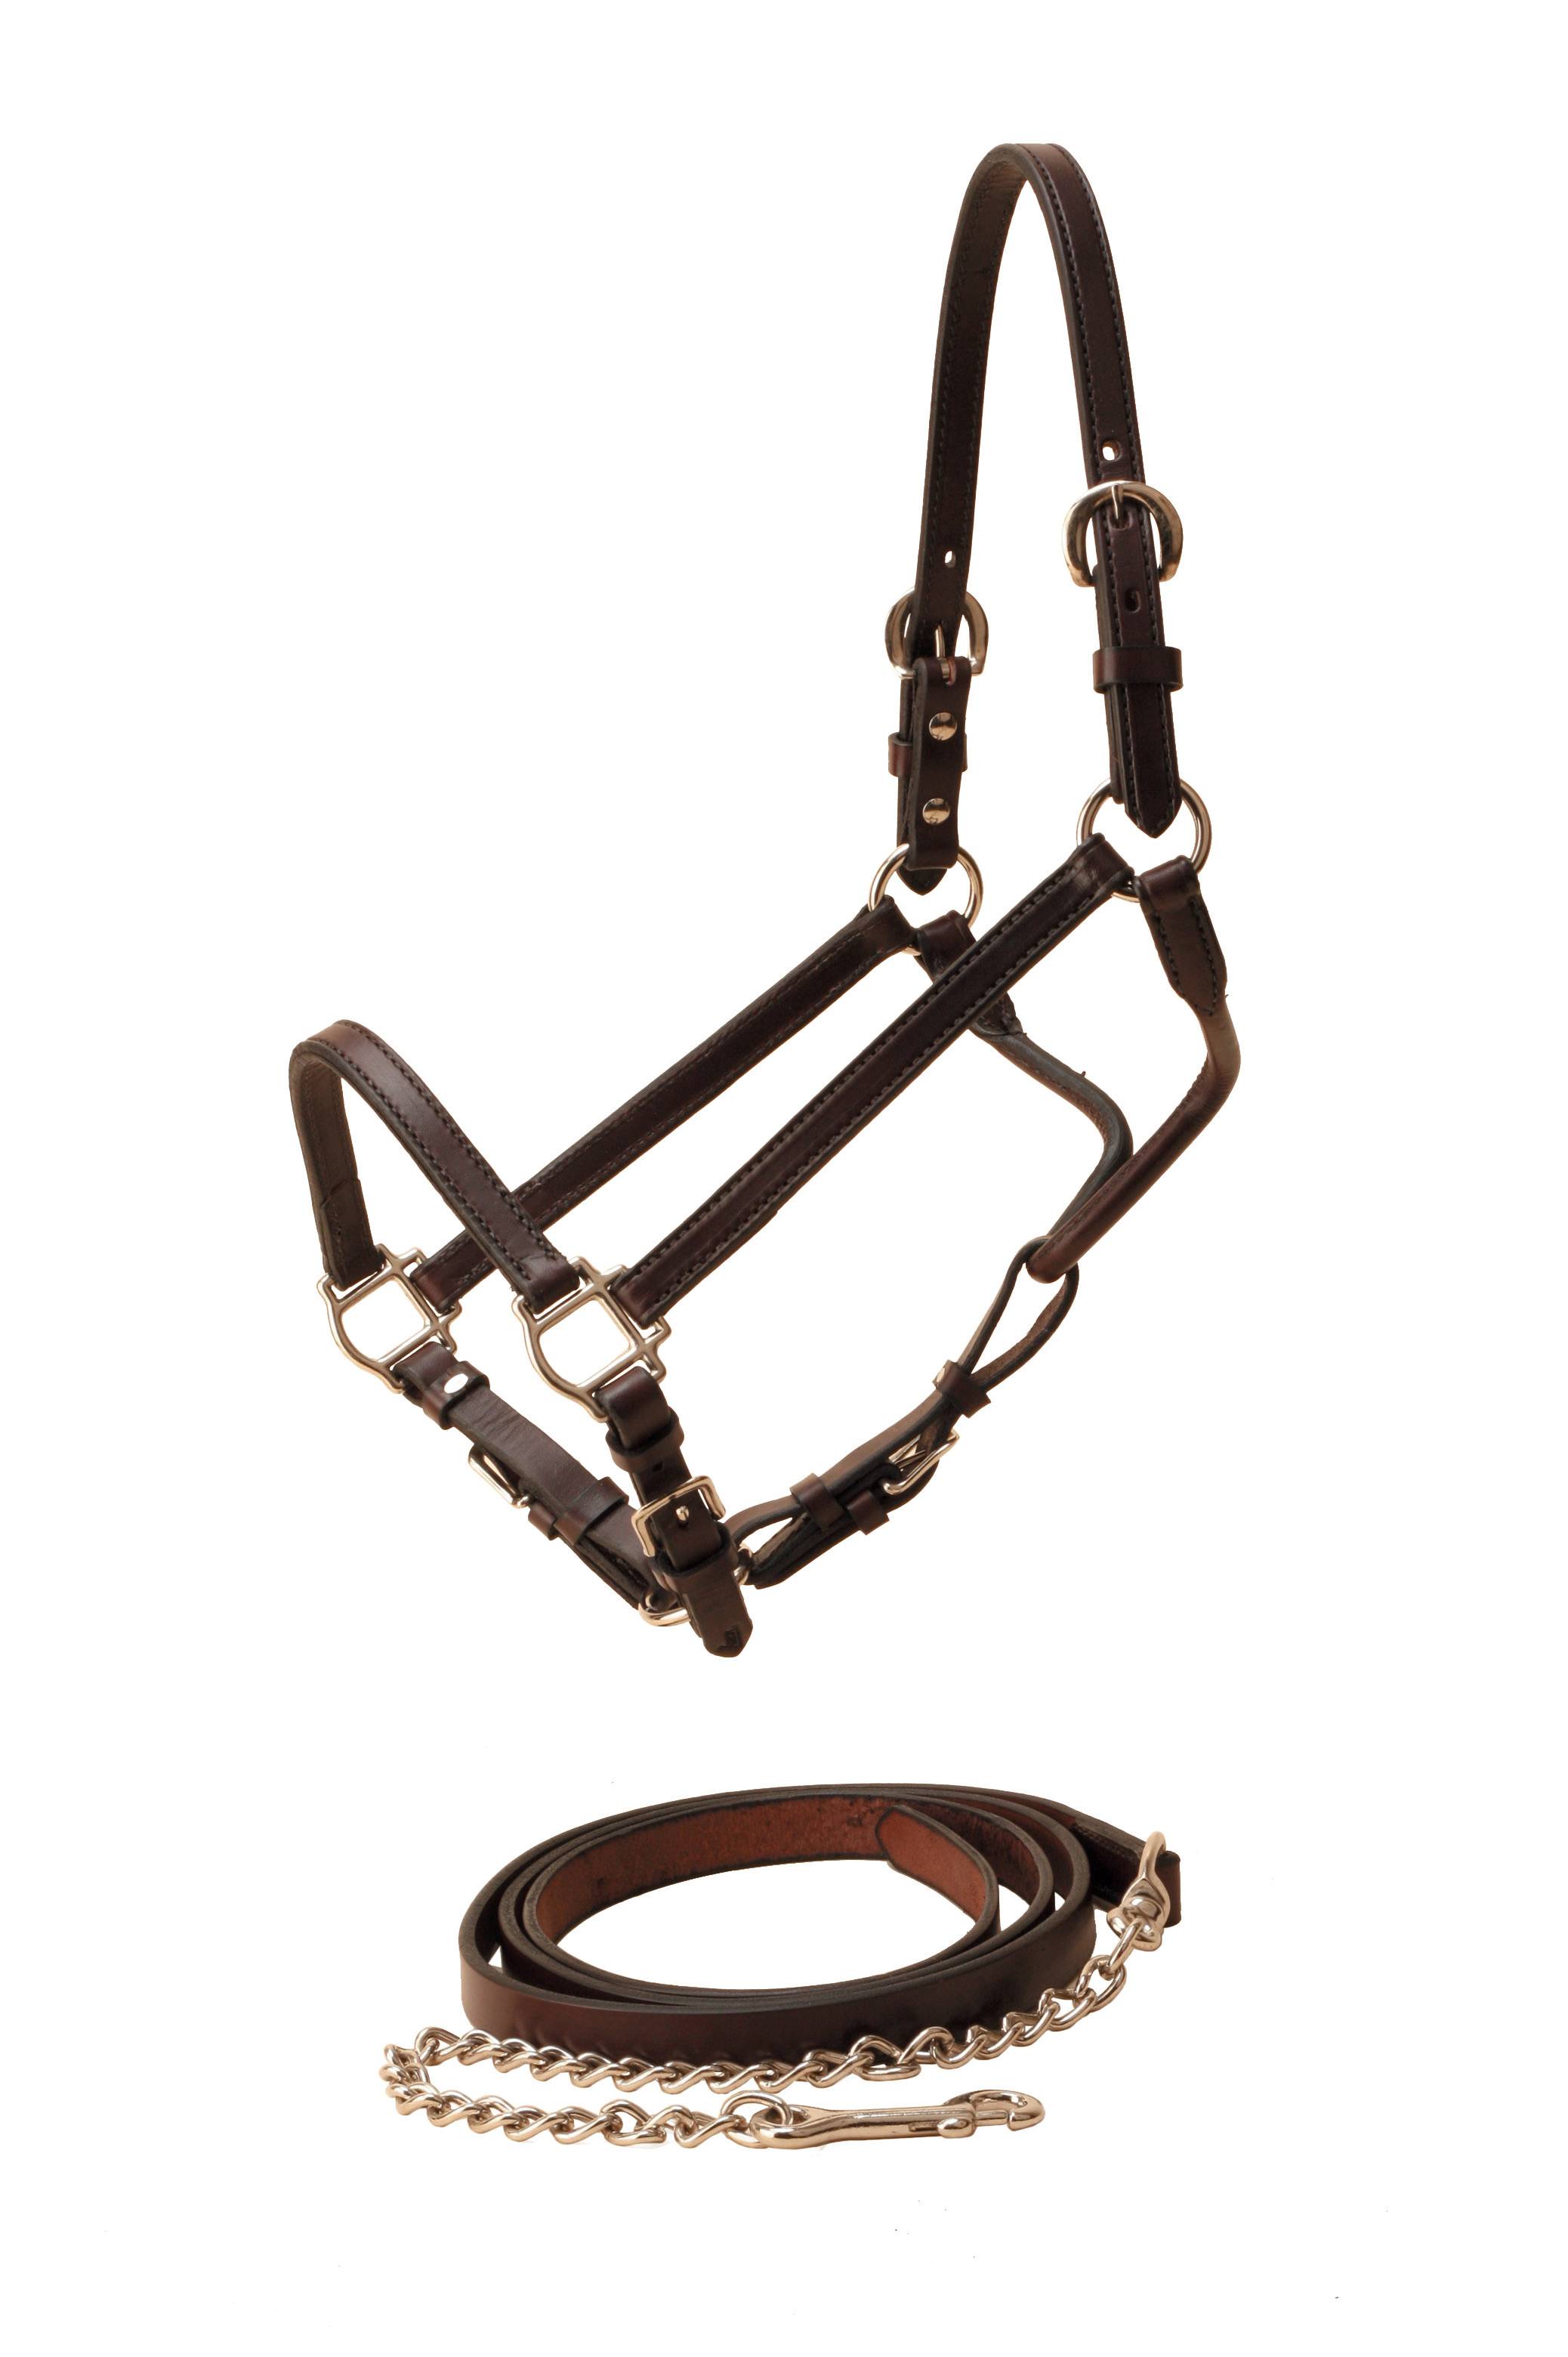 Tory Leather Show Halter & Chain Lead